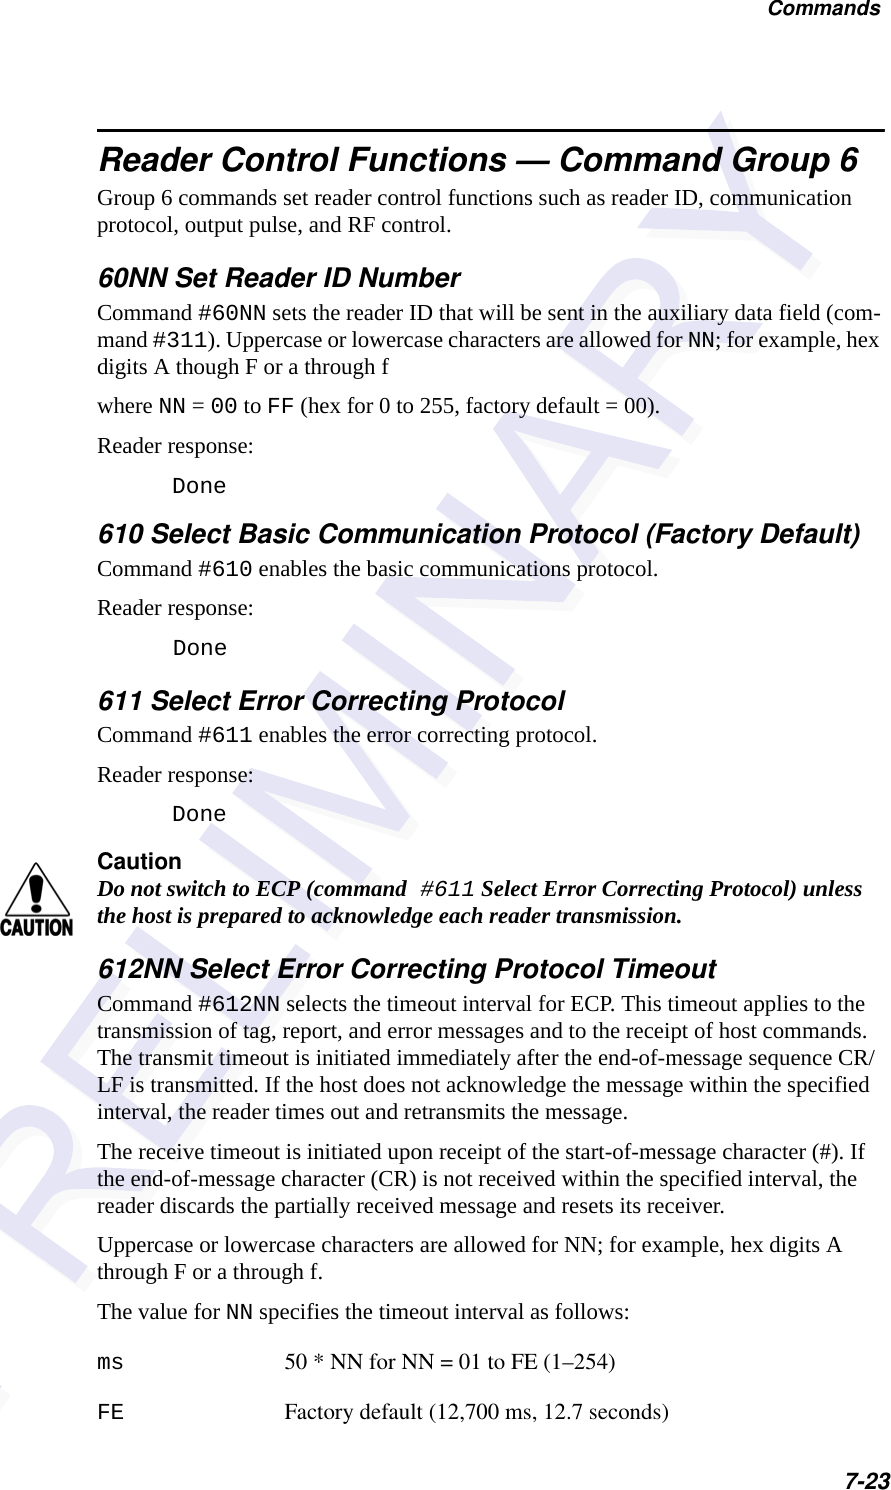 Commands7-23Reader Control Functions — Command Group 6Group 6 commands set reader control functions such as reader ID, communication protocol, output pulse, and RF control.60NN Set Reader ID NumberCommand #60NN sets the reader ID that will be sent in the auxiliary data field (com-mand #311). Uppercase or lowercase characters are allowed for NN; for example, hex digits A though F or a through fwhere NN = 00 to FF (hex for 0 to 255, factory default = 00).Reader response:Done610 Select Basic Communication Protocol (Factory Default)Command #610 enables the basic communications protocol.Reader response:Done 611 Select Error Correcting ProtocolCommand #611 enables the error correcting protocol. Reader response:DoneCautionDo not switch to ECP (command #611 Select Error Correcting Protocol) unless the host is prepared to acknowledge each reader transmission.612NN Select Error Correcting Protocol TimeoutCommand #612NN selects the timeout interval for ECP. This timeout applies to the transmission of tag, report, and error messages and to the receipt of host commands. The transmit timeout is initiated immediately after the end-of-message sequence CR/LF is transmitted. If the host does not acknowledge the message within the specified interval, the reader times out and retransmits the message.The receive timeout is initiated upon receipt of the start-of-message character (#). If the end-of-message character (CR) is not received within the specified interval, the reader discards the partially received message and resets its receiver.Uppercase or lowercase characters are allowed for NN; for example, hex digits A through F or a through f.The value for NN specifies the timeout interval as follows:ms 50 * NN for NN = 01 to FE (1–254)FE Factory default (12,700 ms, 12.7 seconds)